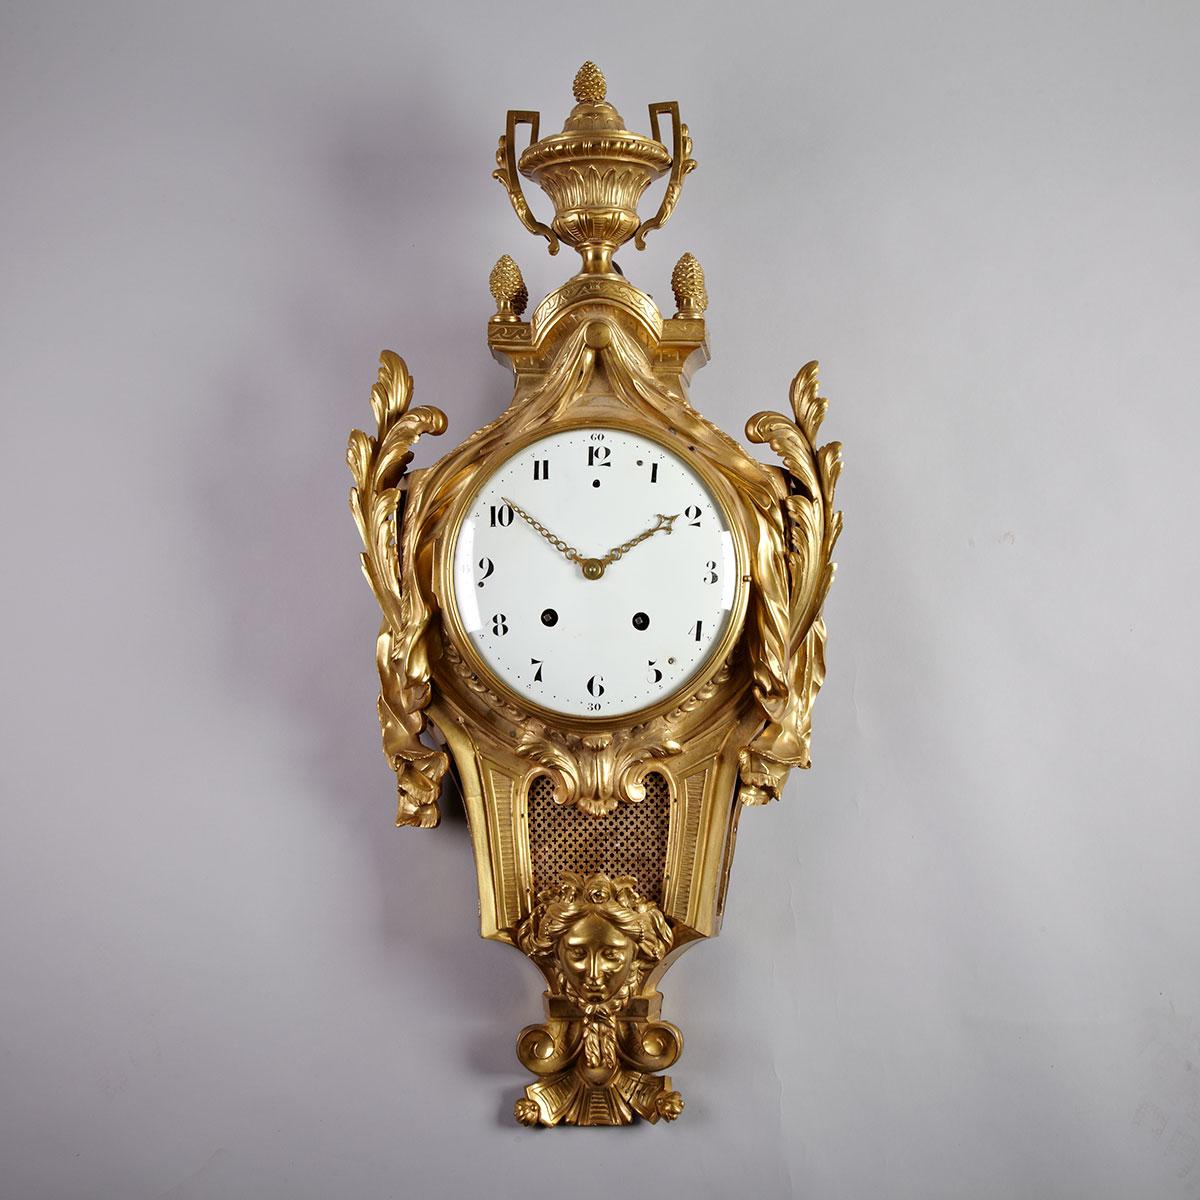 Large Louis XVI Style Gilt Bronze Cartel Clock, French, early 19th century